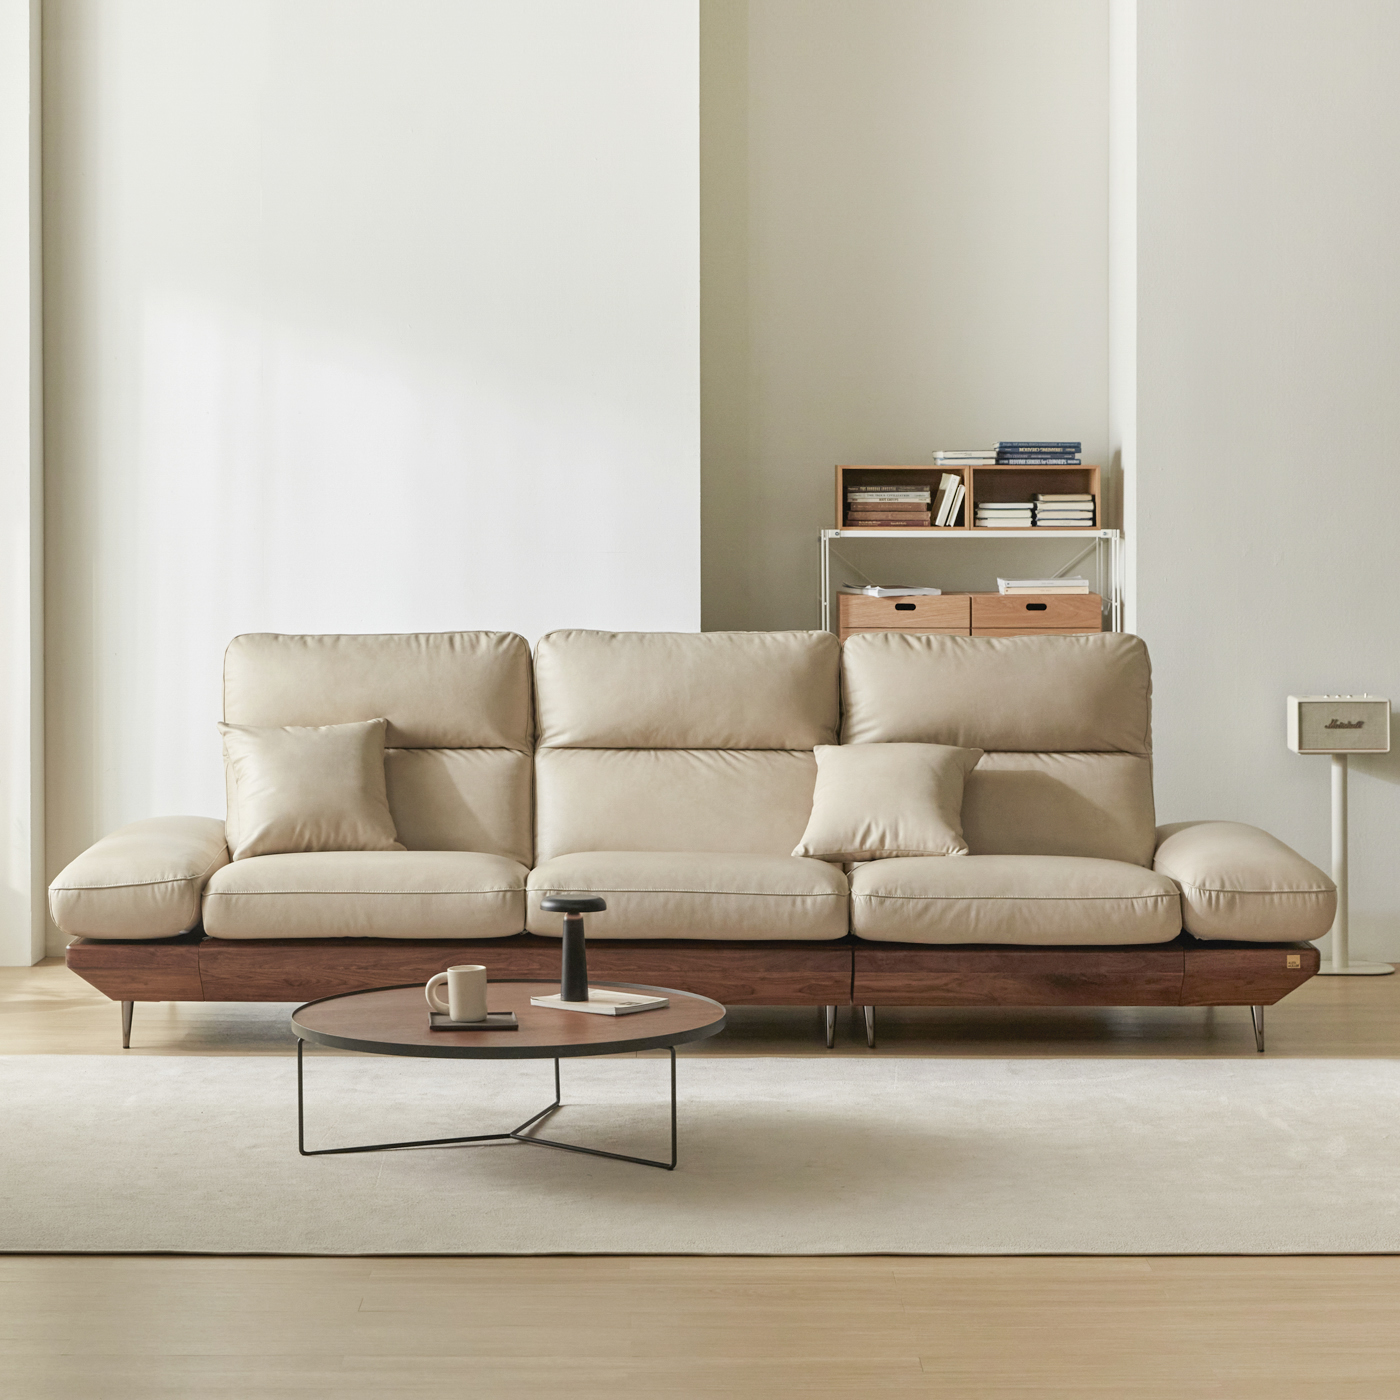 <p style="text-align:left; font-size:16px; margin-top:26px;">Gotha Sofa<br><span style="color:#666;">₩ 2,568,000~</span></p>